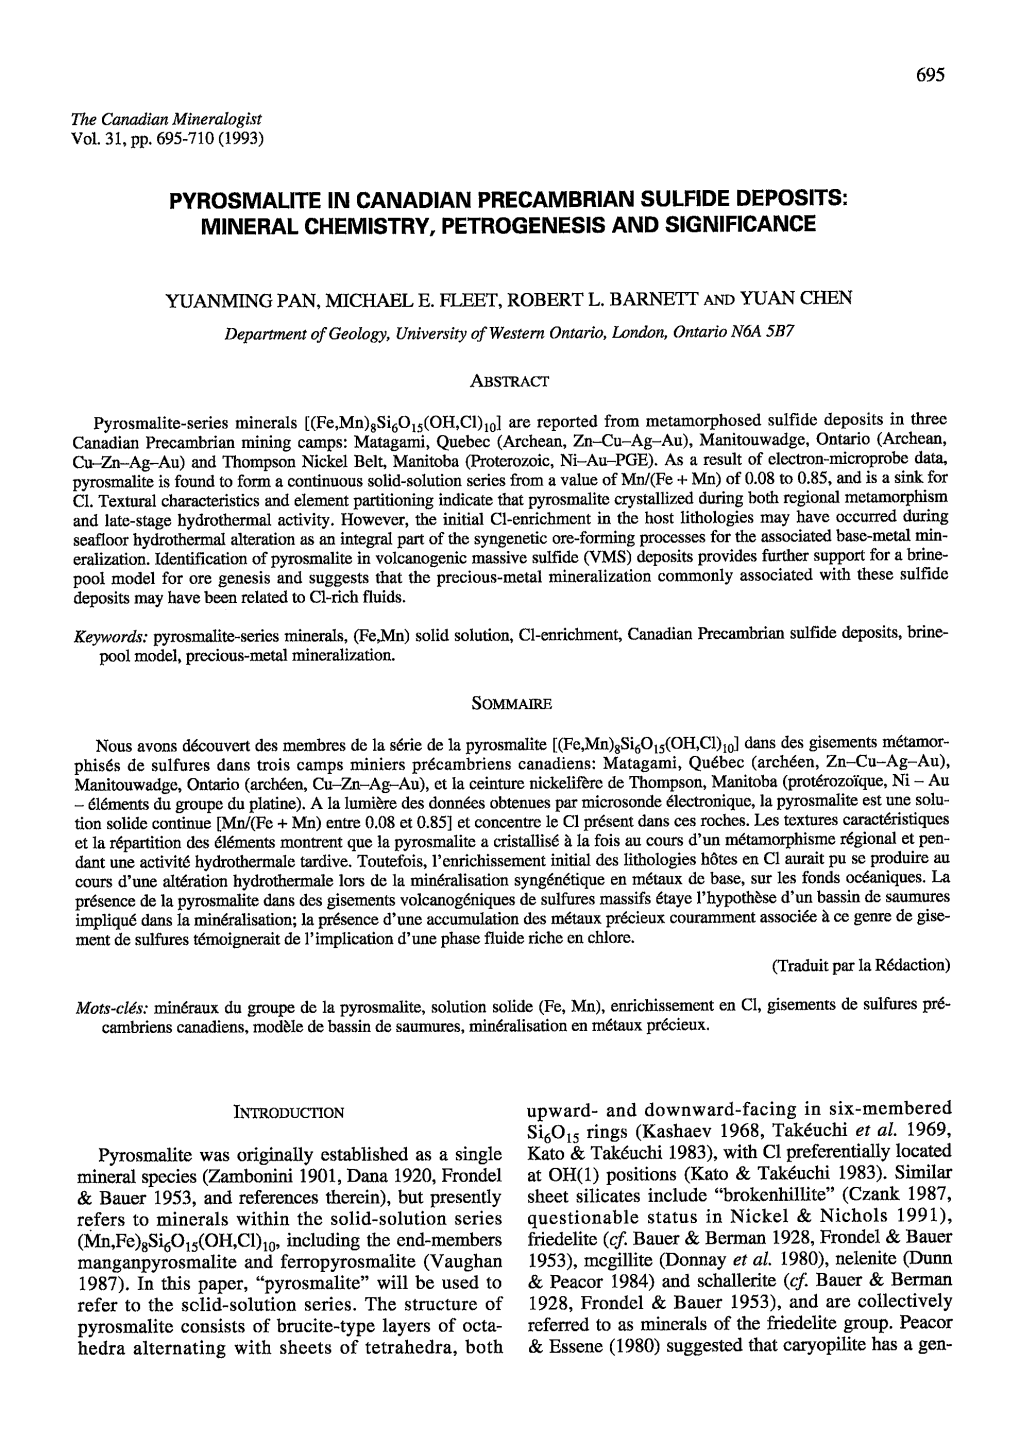 Mineral Chemistry, Petrogenesis And